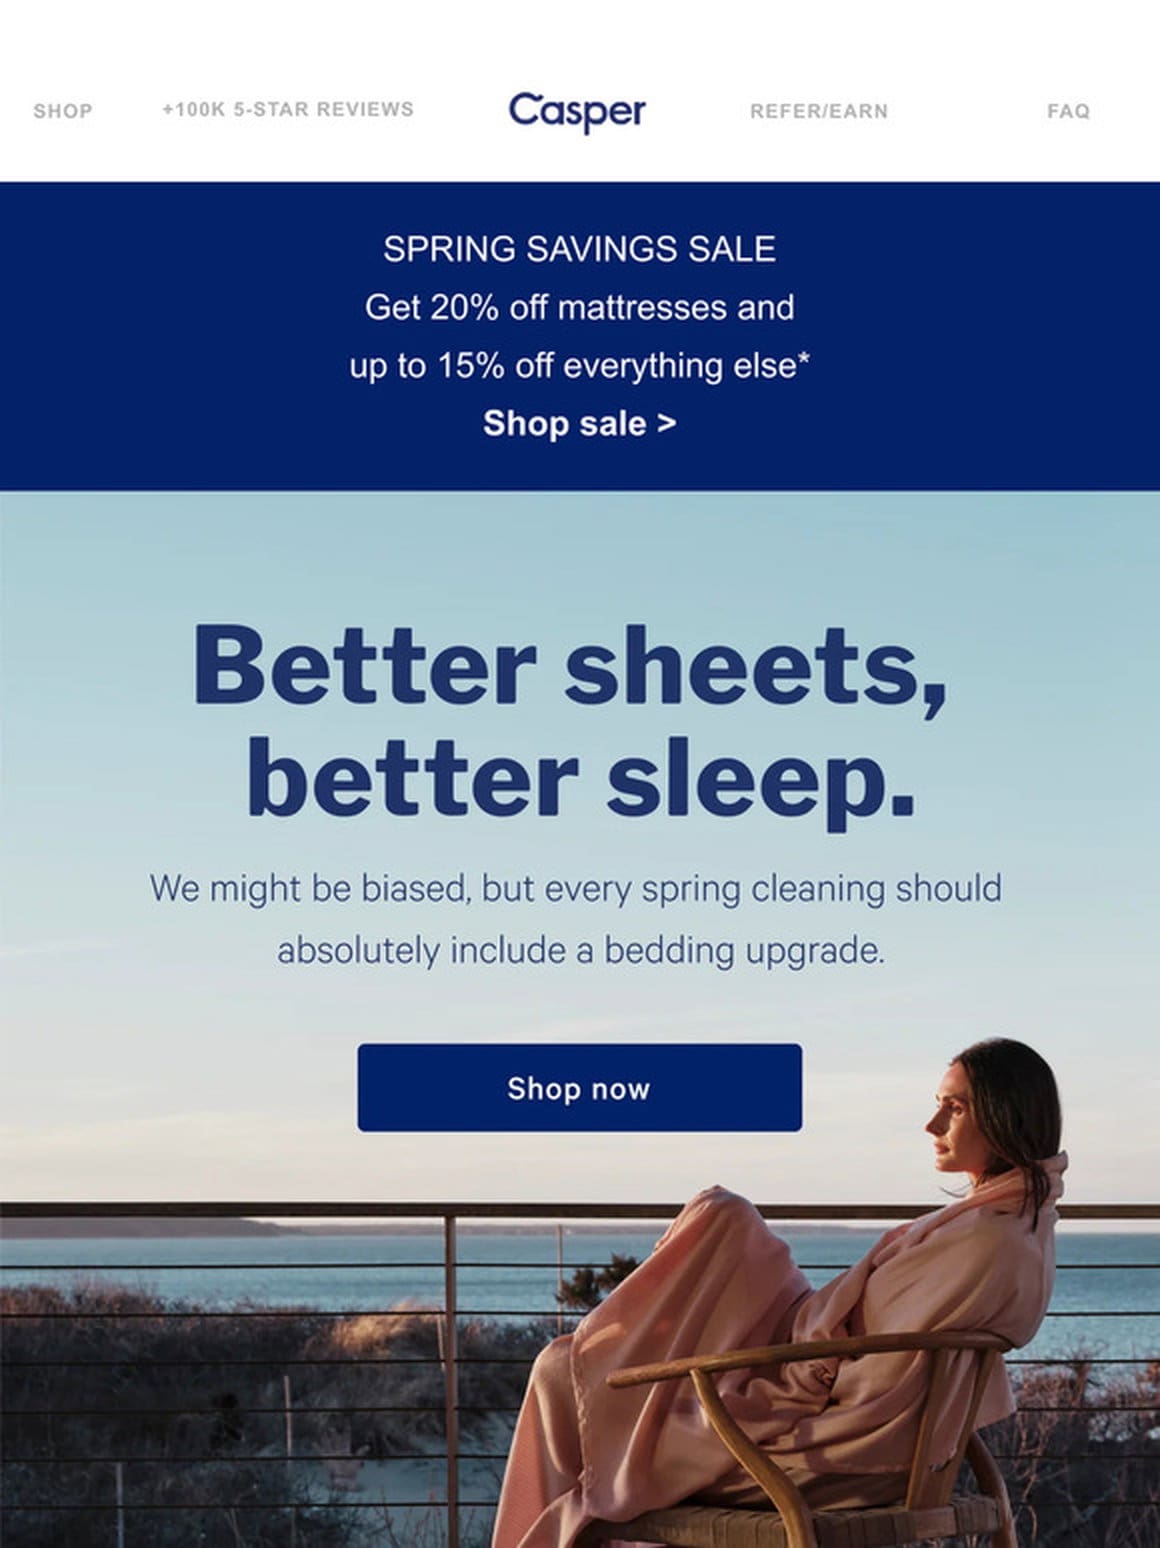 Refresh your sheets for spring.